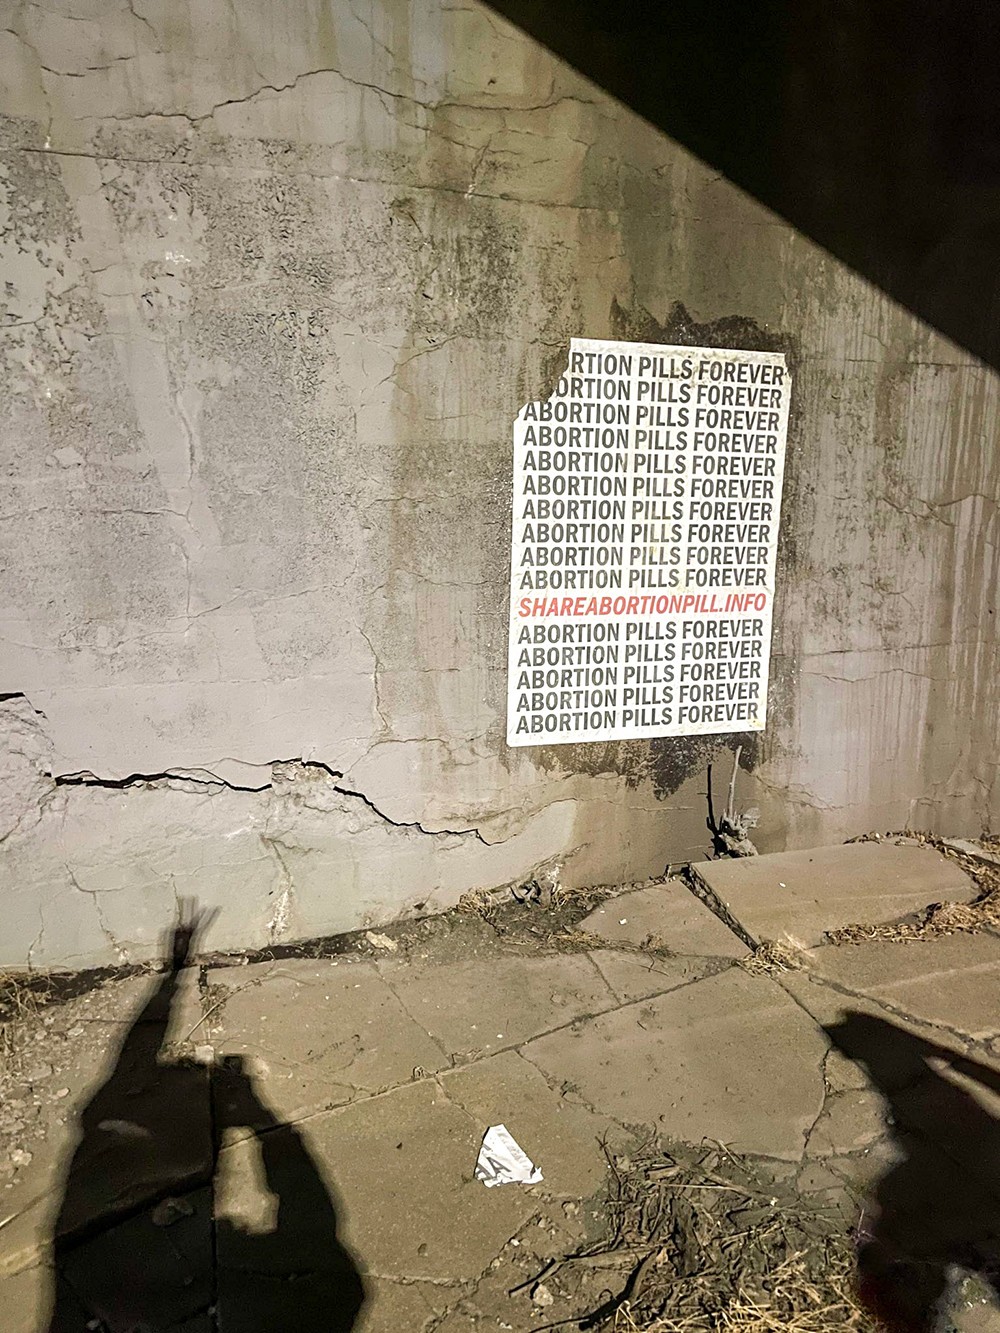 Someone already tried to take one of the abortion pill posters down, but the wheatpaste held up. - COURTESY PHOTO